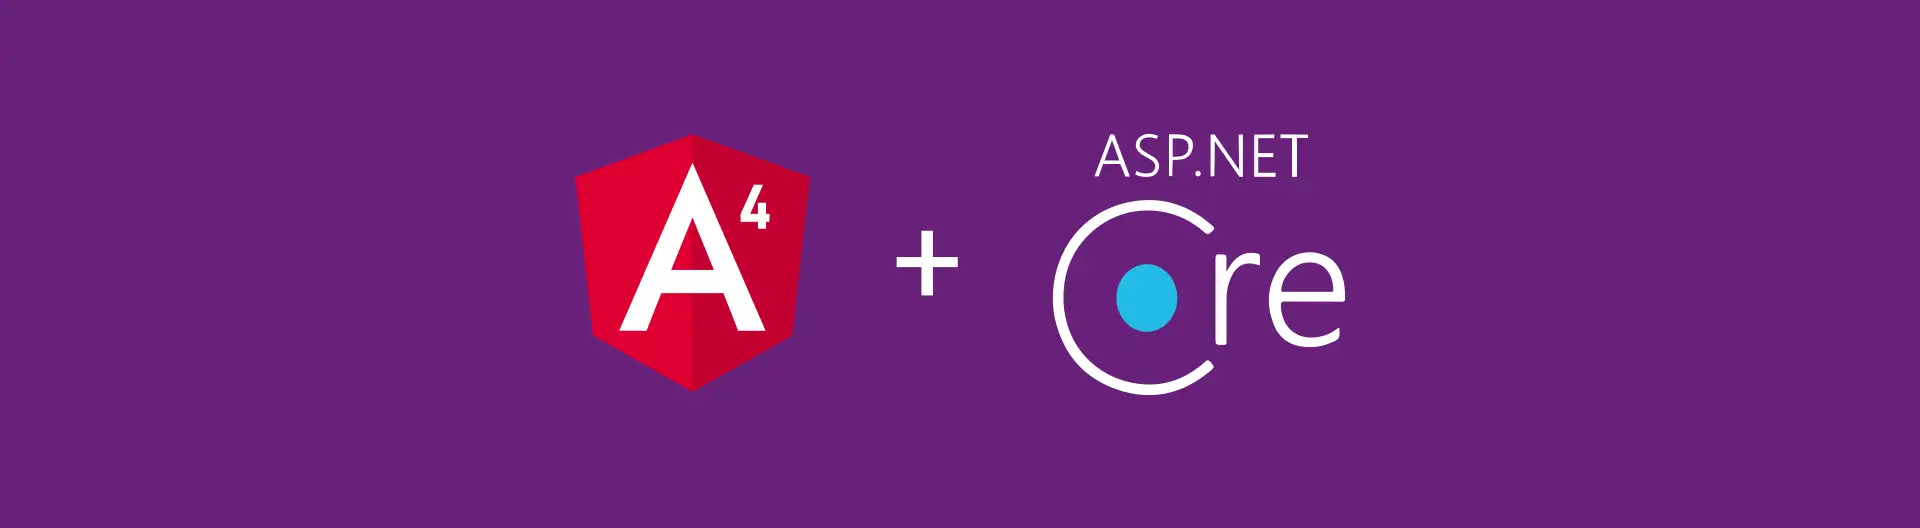 Tutorial: Creating ASP.NET Core + Angular 4 application with connection to MongoDB in Ubuntu - Banner